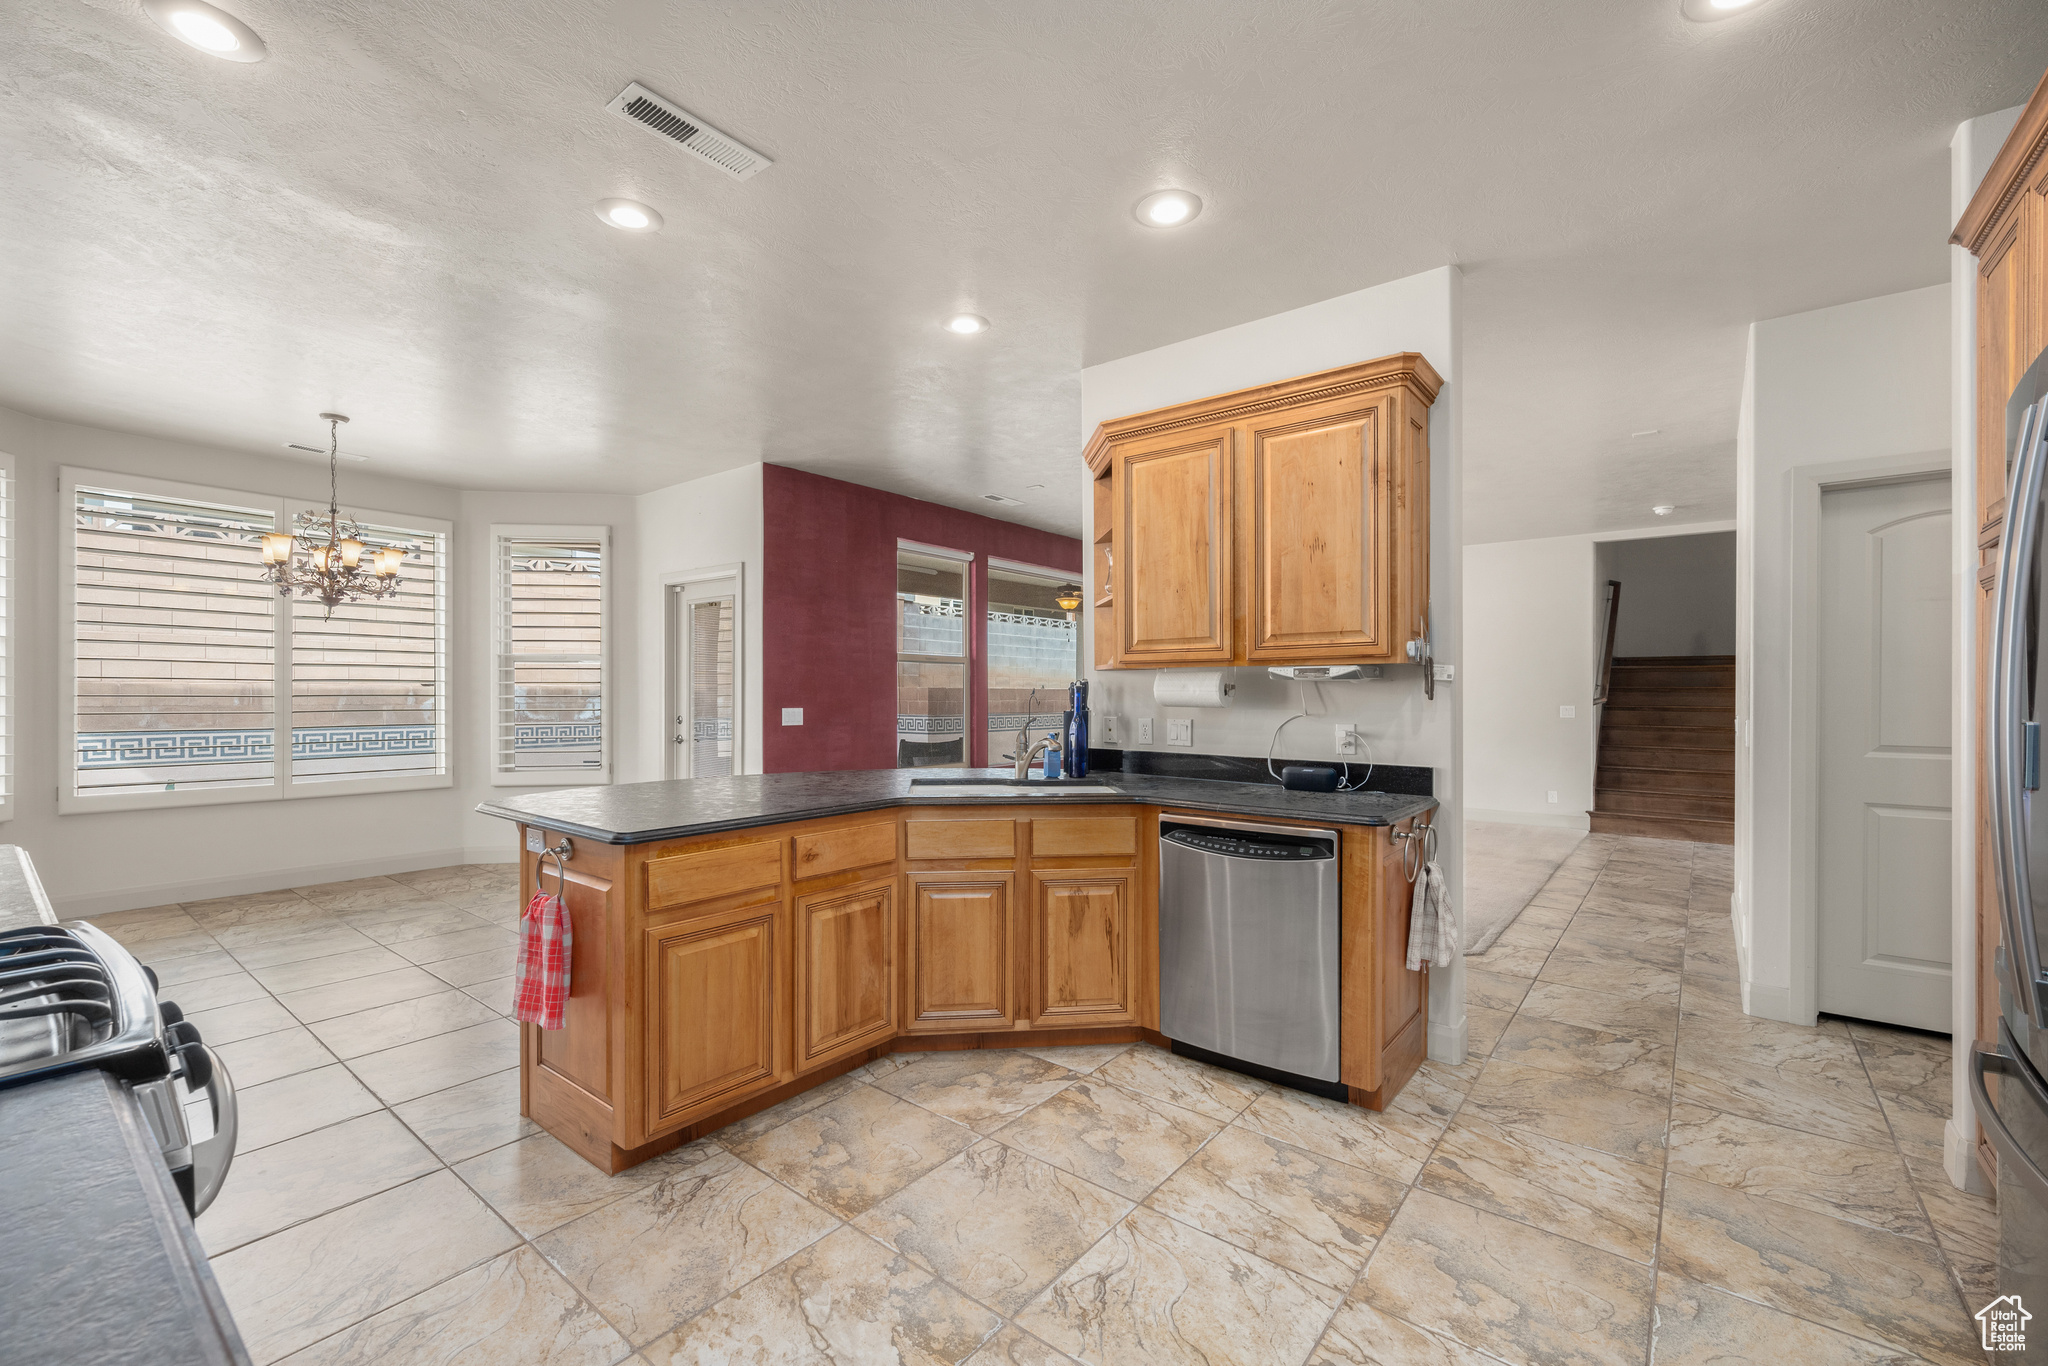 Kitchen with light tile flooring, an inviting chandelier, stove, hanging light fixtures, and dishwasher